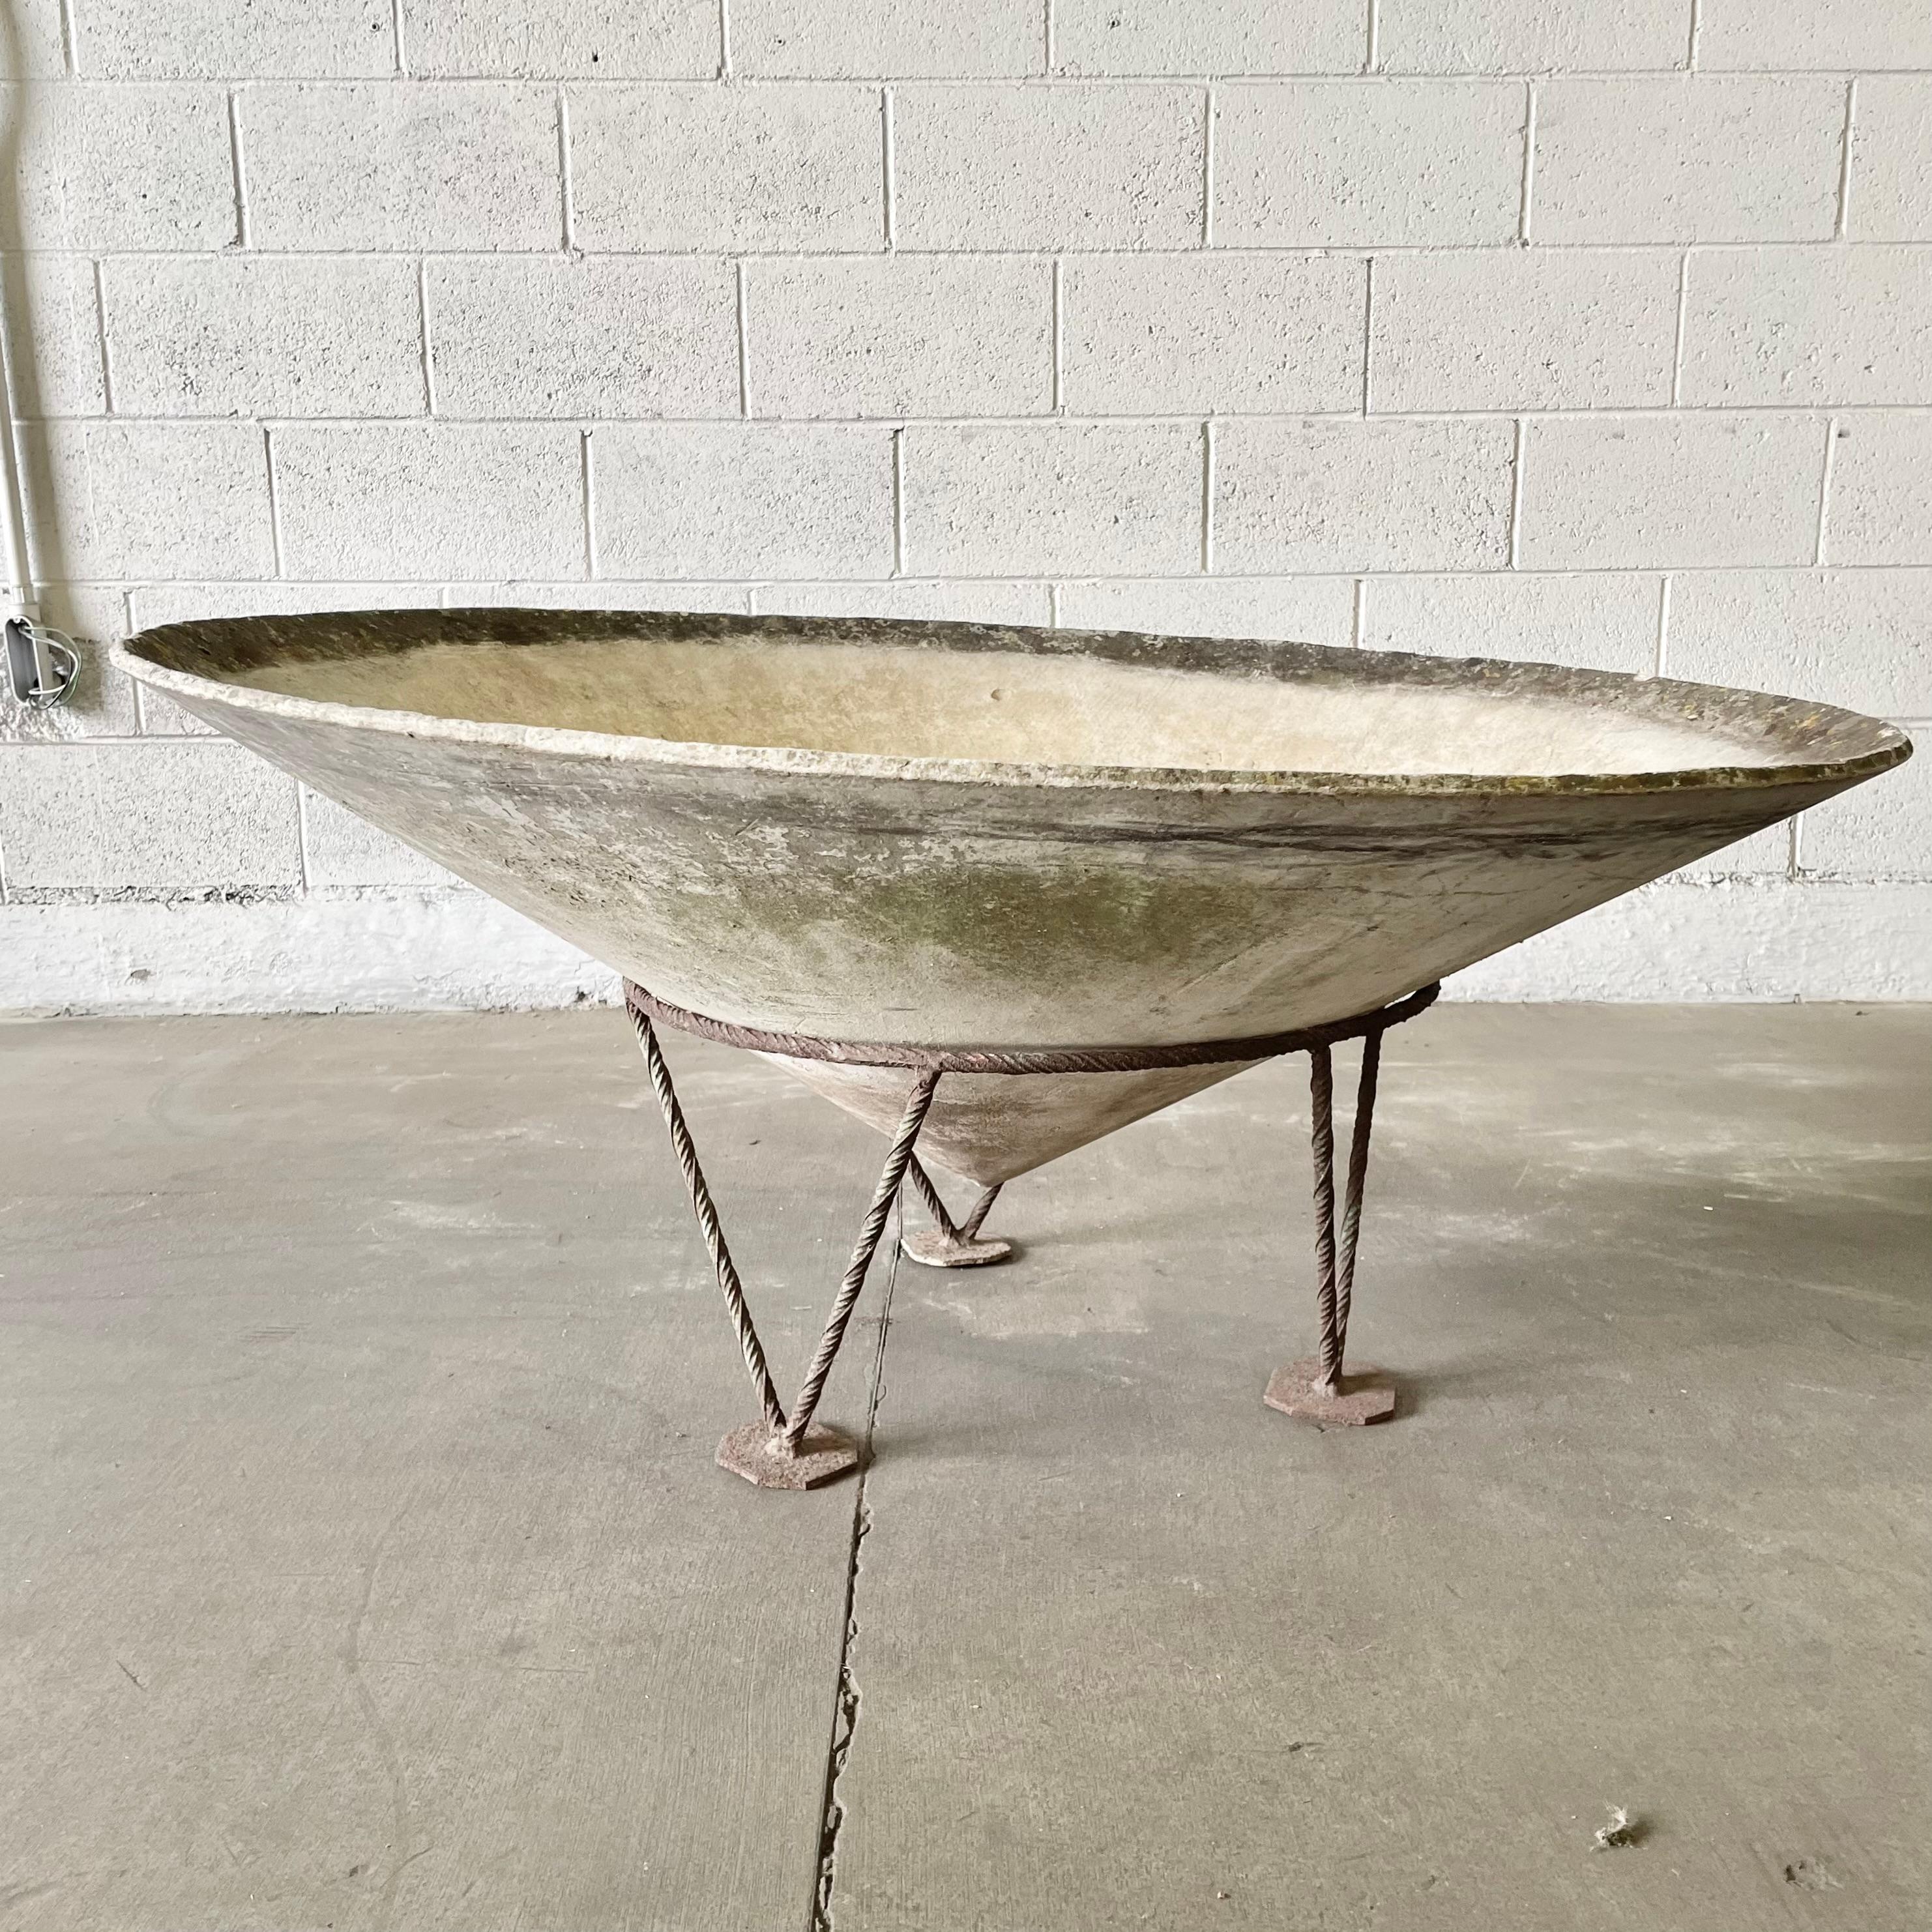 Mid-20th Century Willy Guhl Monumental Cone Planter on Stand, 1960s Switzerland For Sale